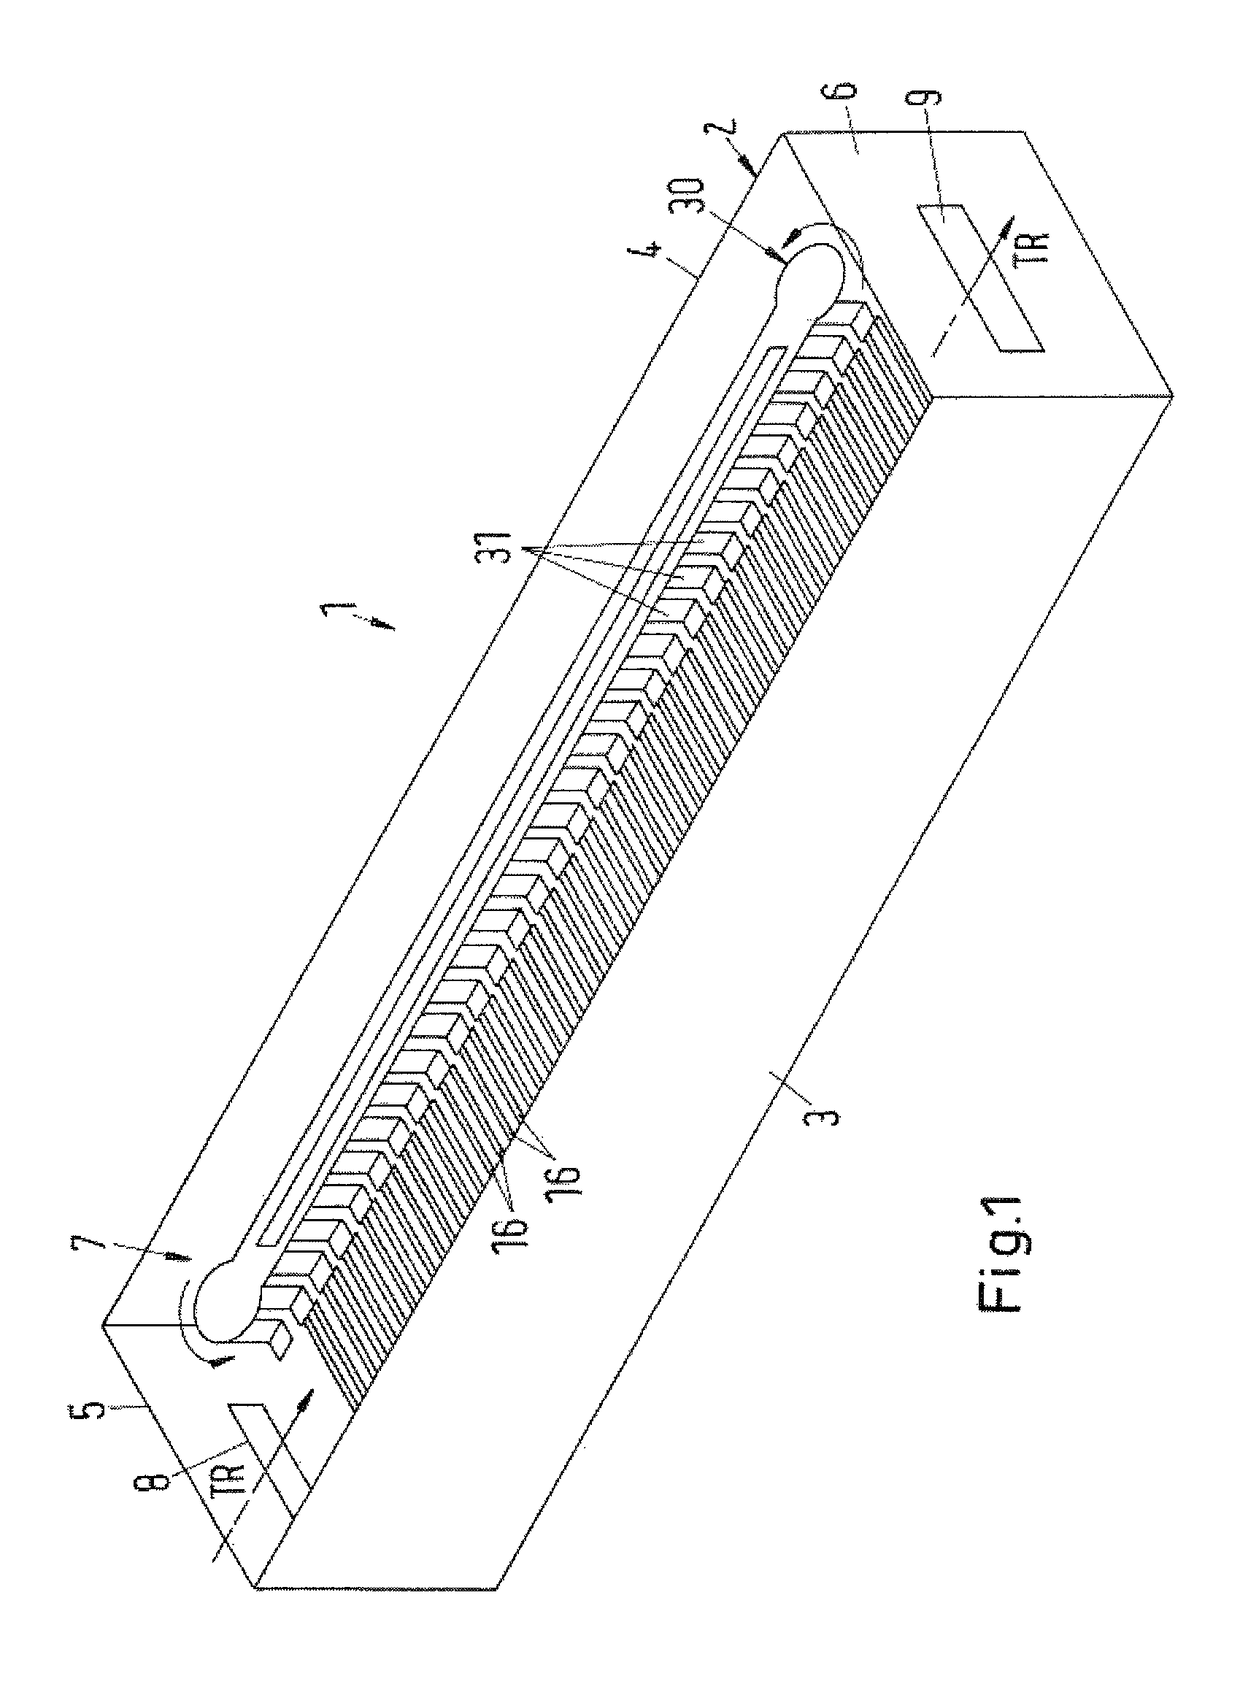 Method and apparatus for electrolytically depositing a deposition metal on a workpiece